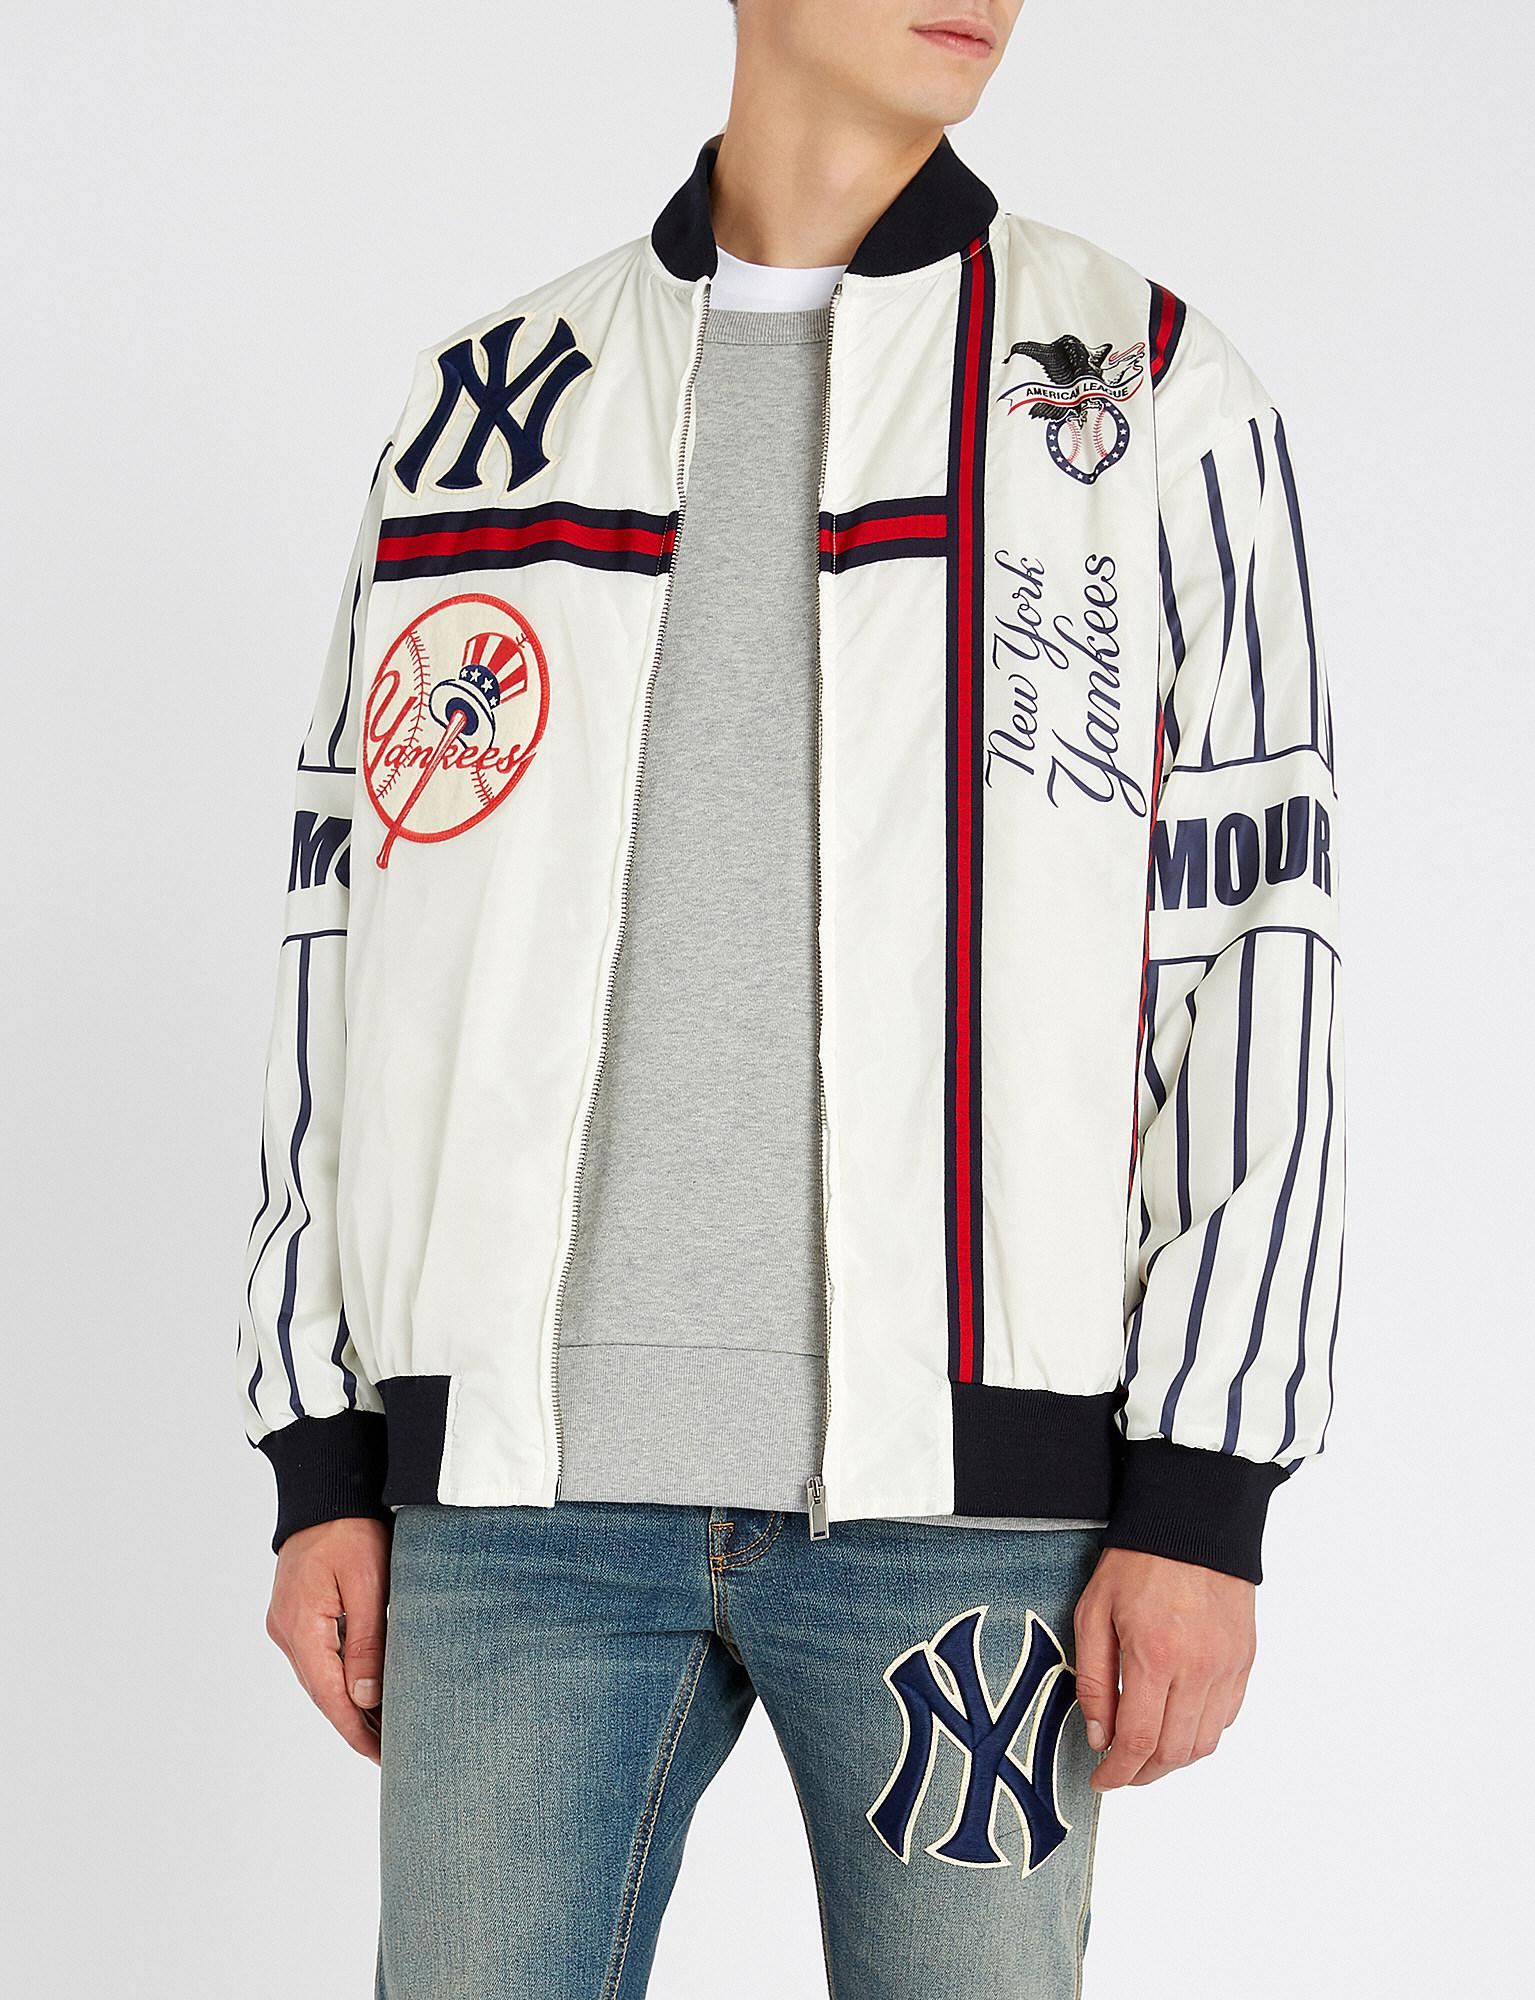 Lyst - Gucci New York Yankees Striped Bomber Jacket in White for Men